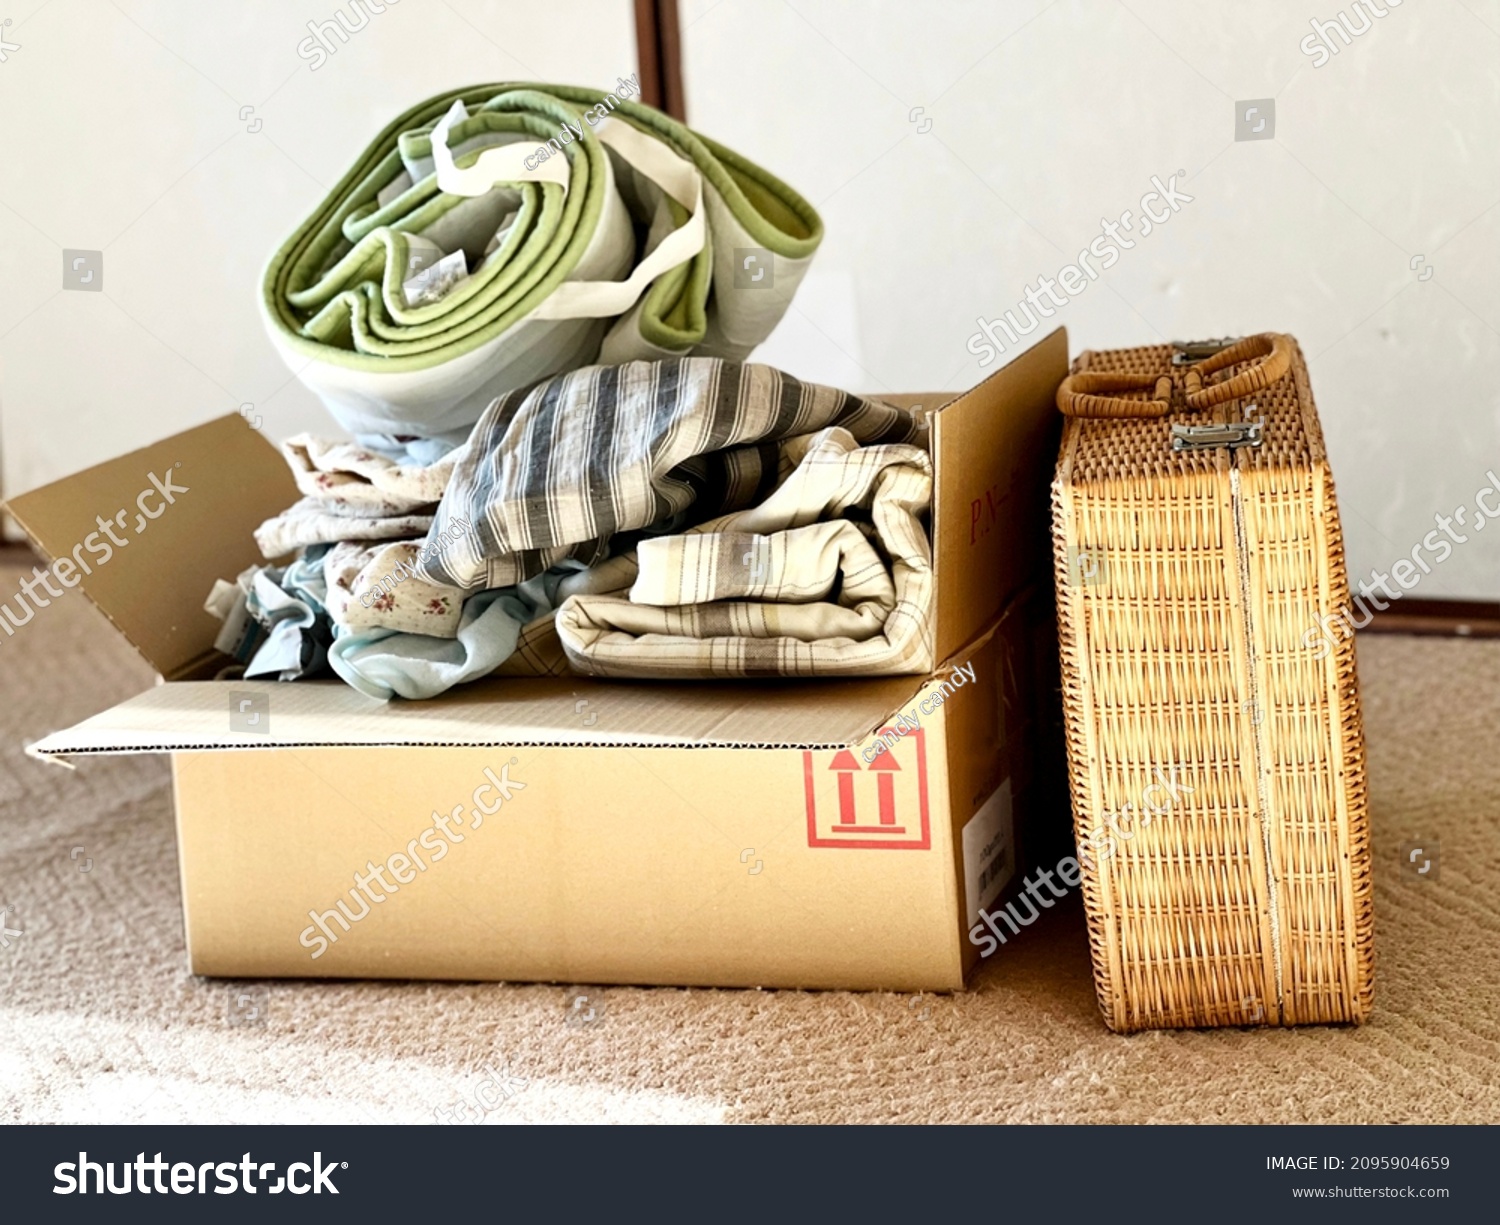 Clothes and baskets in cardboard boxes #2095904659